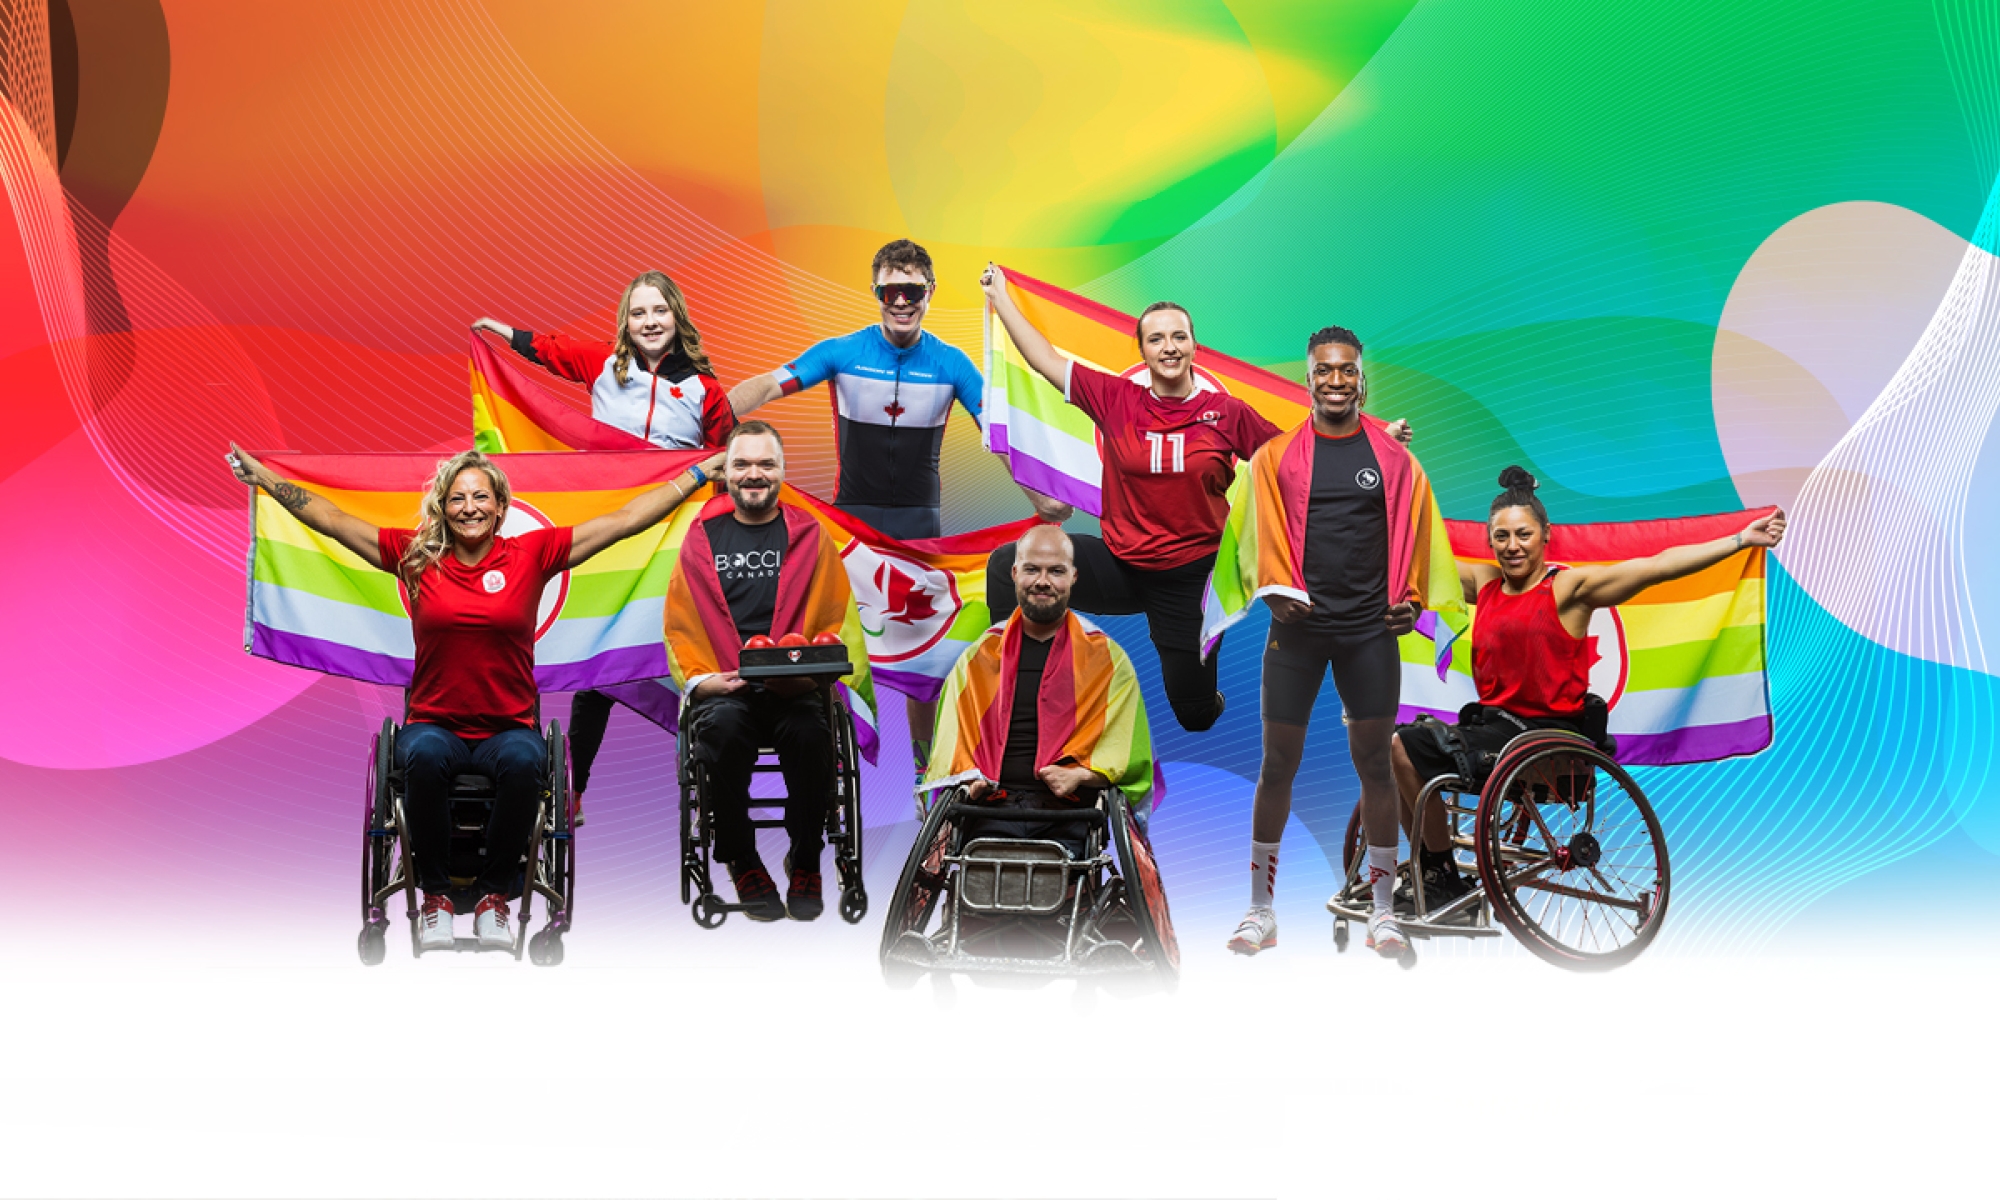 Athletes pose with CPC pride flags on a rainbow background